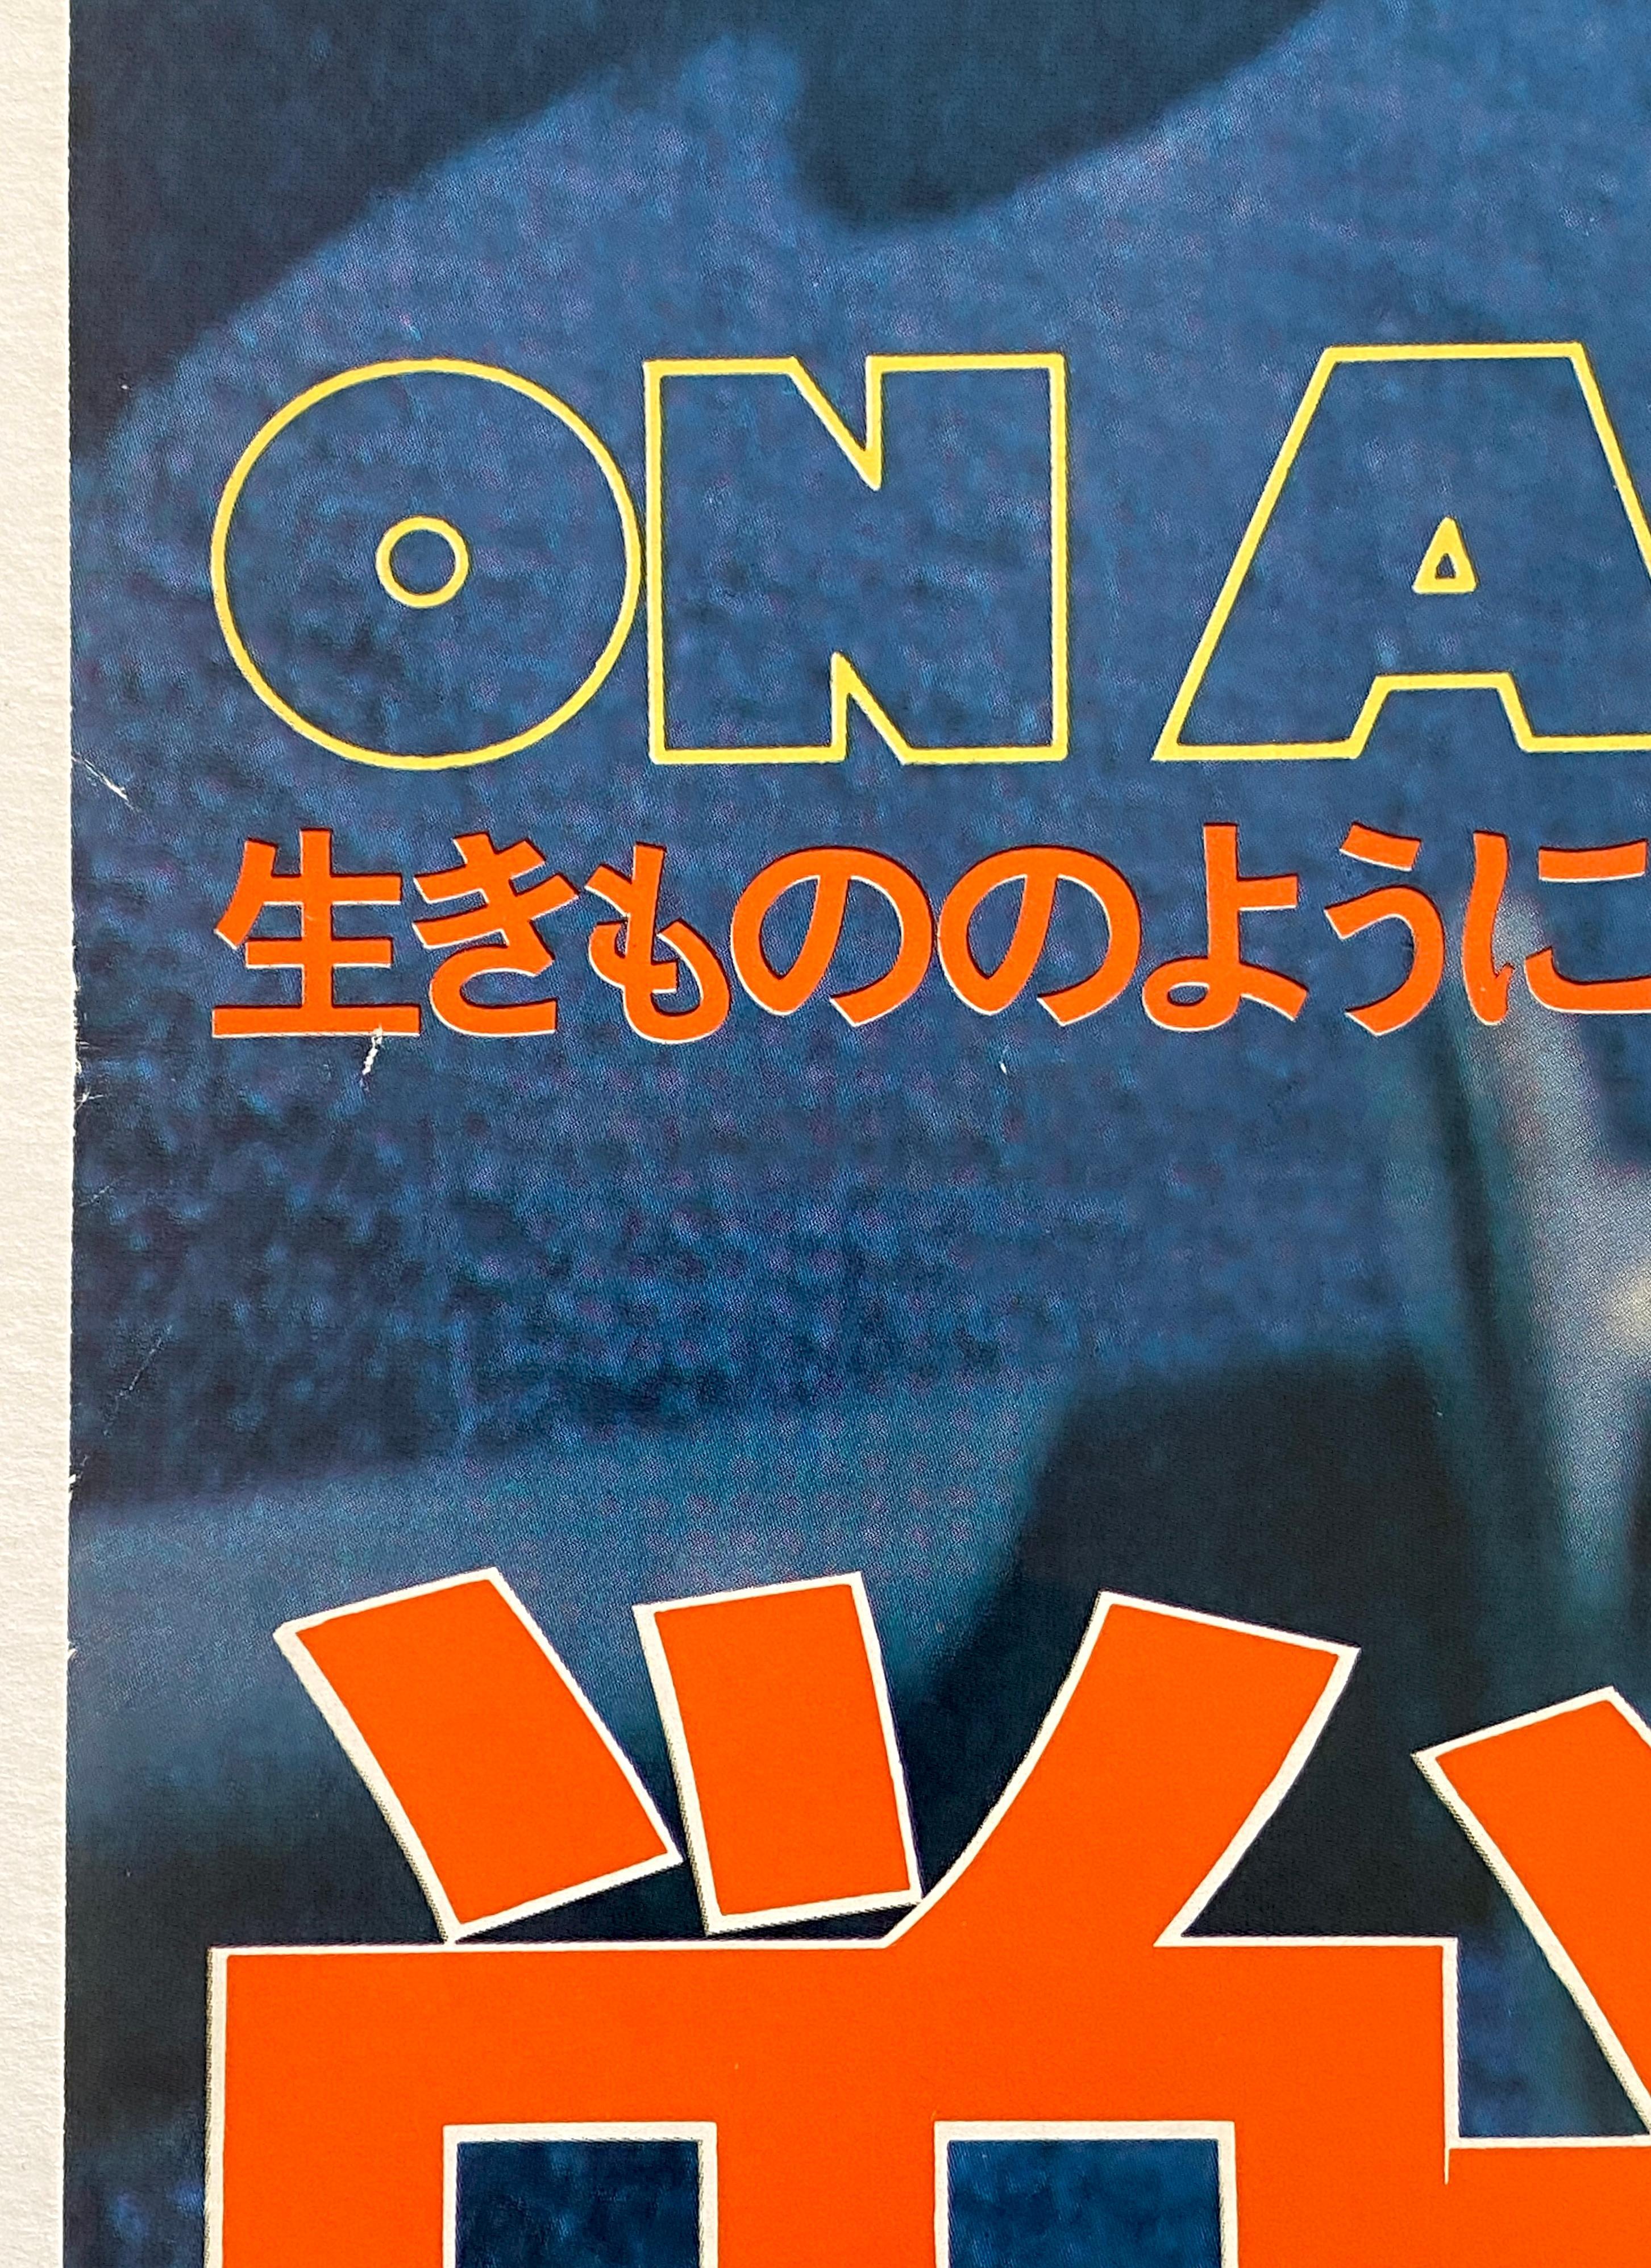 Steve McQueen 'On Any Sunday' Original Vintage Japanese B2 Movie Poster, 1972 For Sale 8